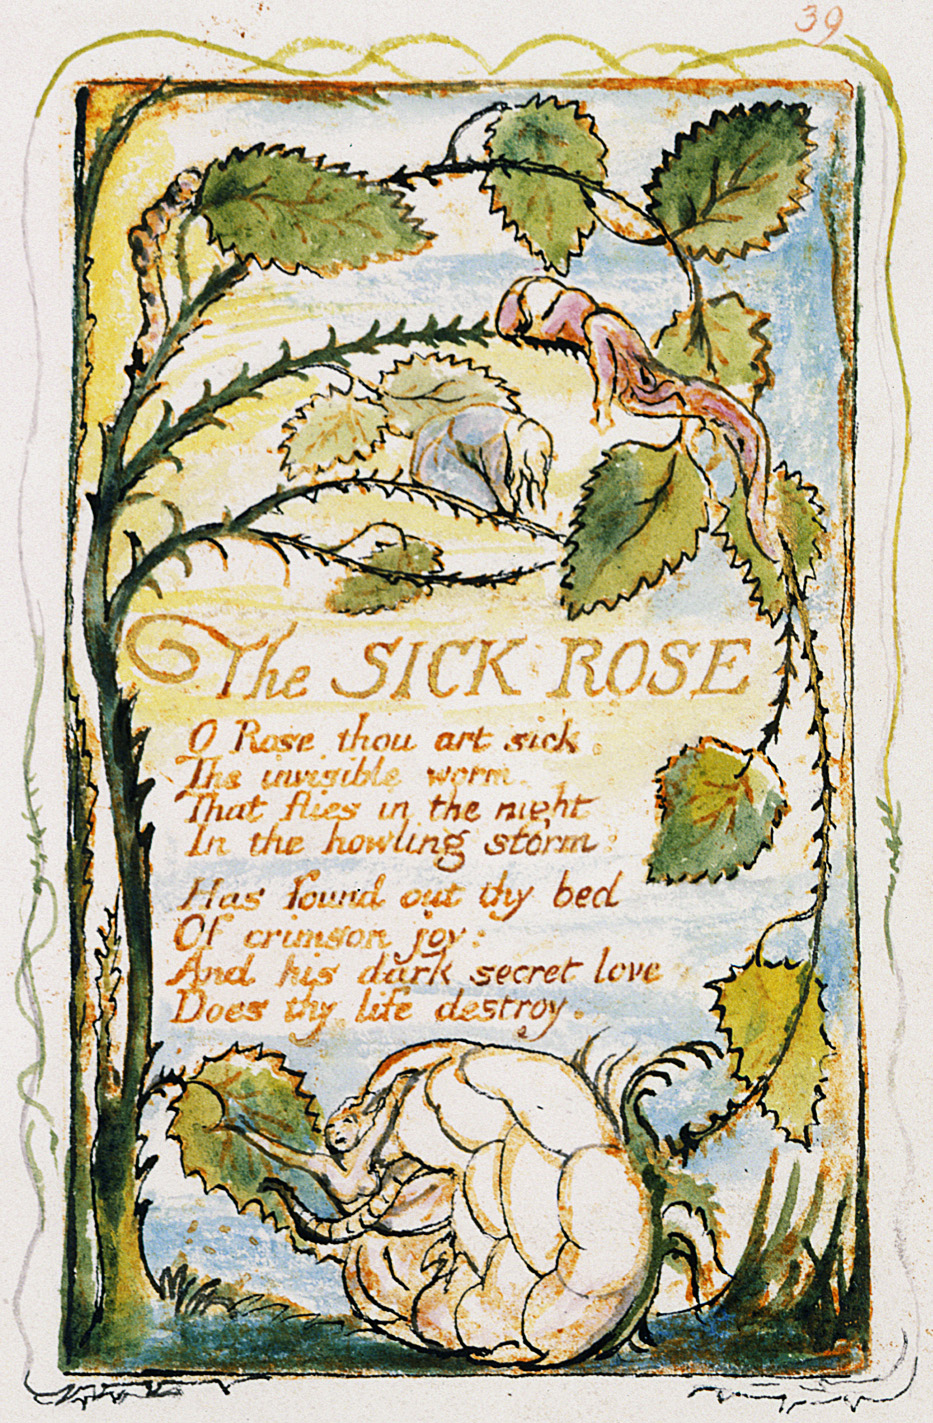 39
	The SICK ROSE
	O Rose thou art sick.
	The invisible worm.
	That flies in the night
	In the howling storm:
	Has found out thy bed
	Of crimson joy:
	And his dark secret love
	Does thy life destroy.